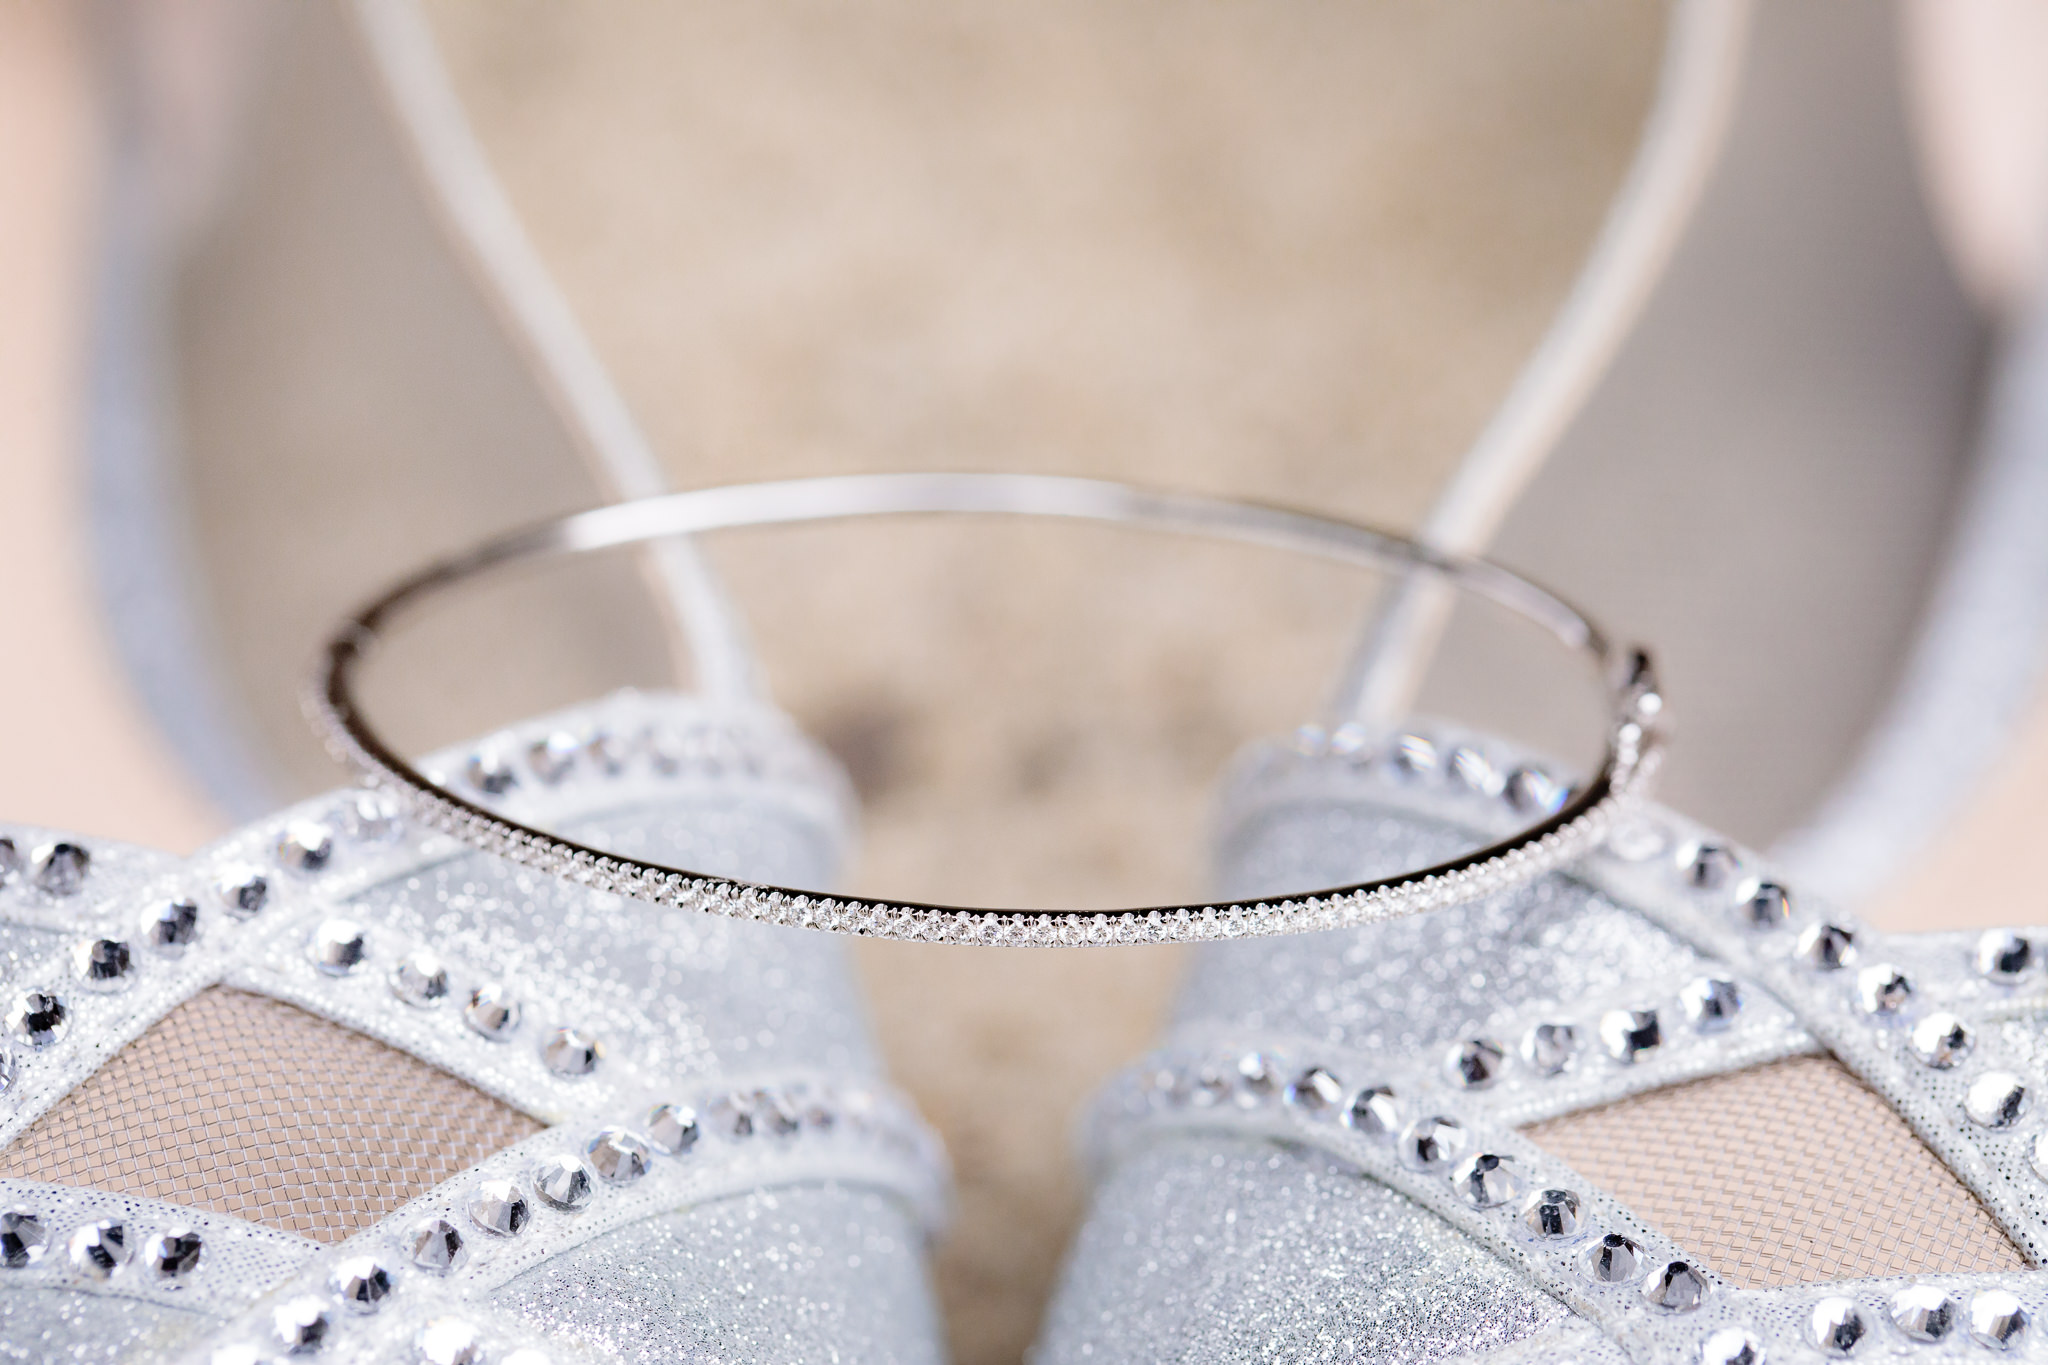 The bride's silver diamond bracelet and matching shoes for a Pennsylvanian wedding